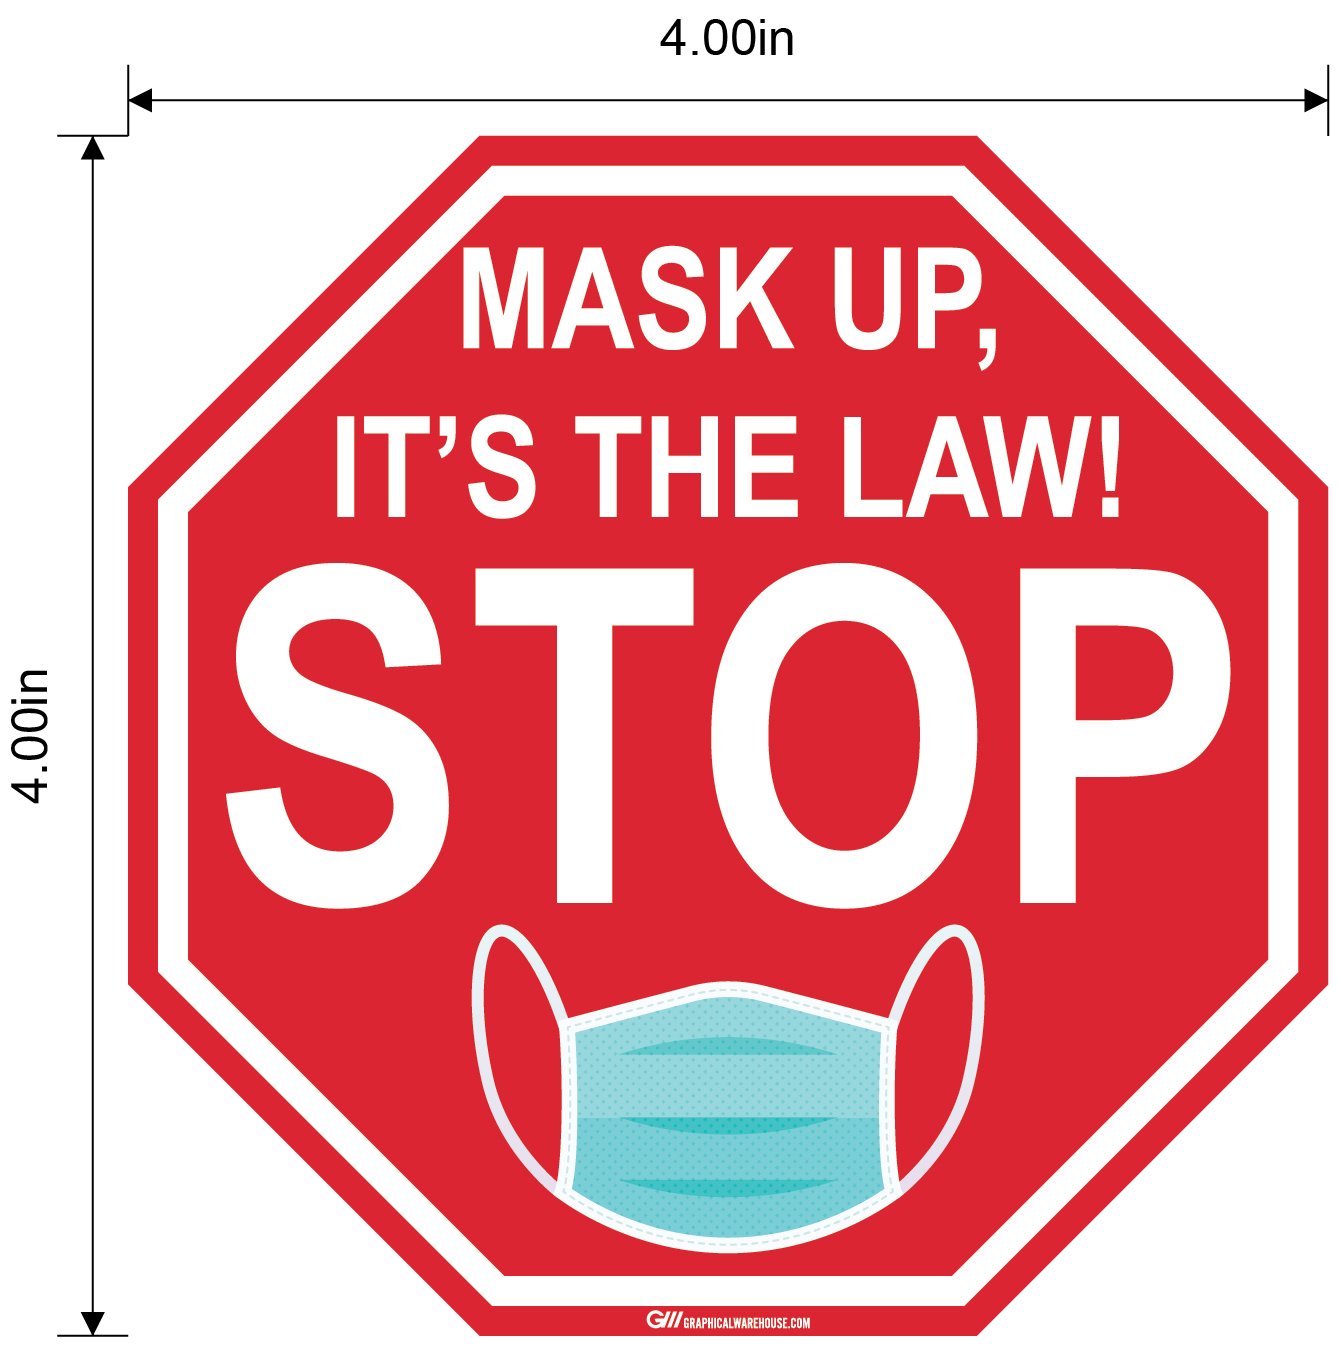 Stop Sign "Mask Up, It's the Law!" Adhesive Durable Vinyl Decal- Various Sizes Available